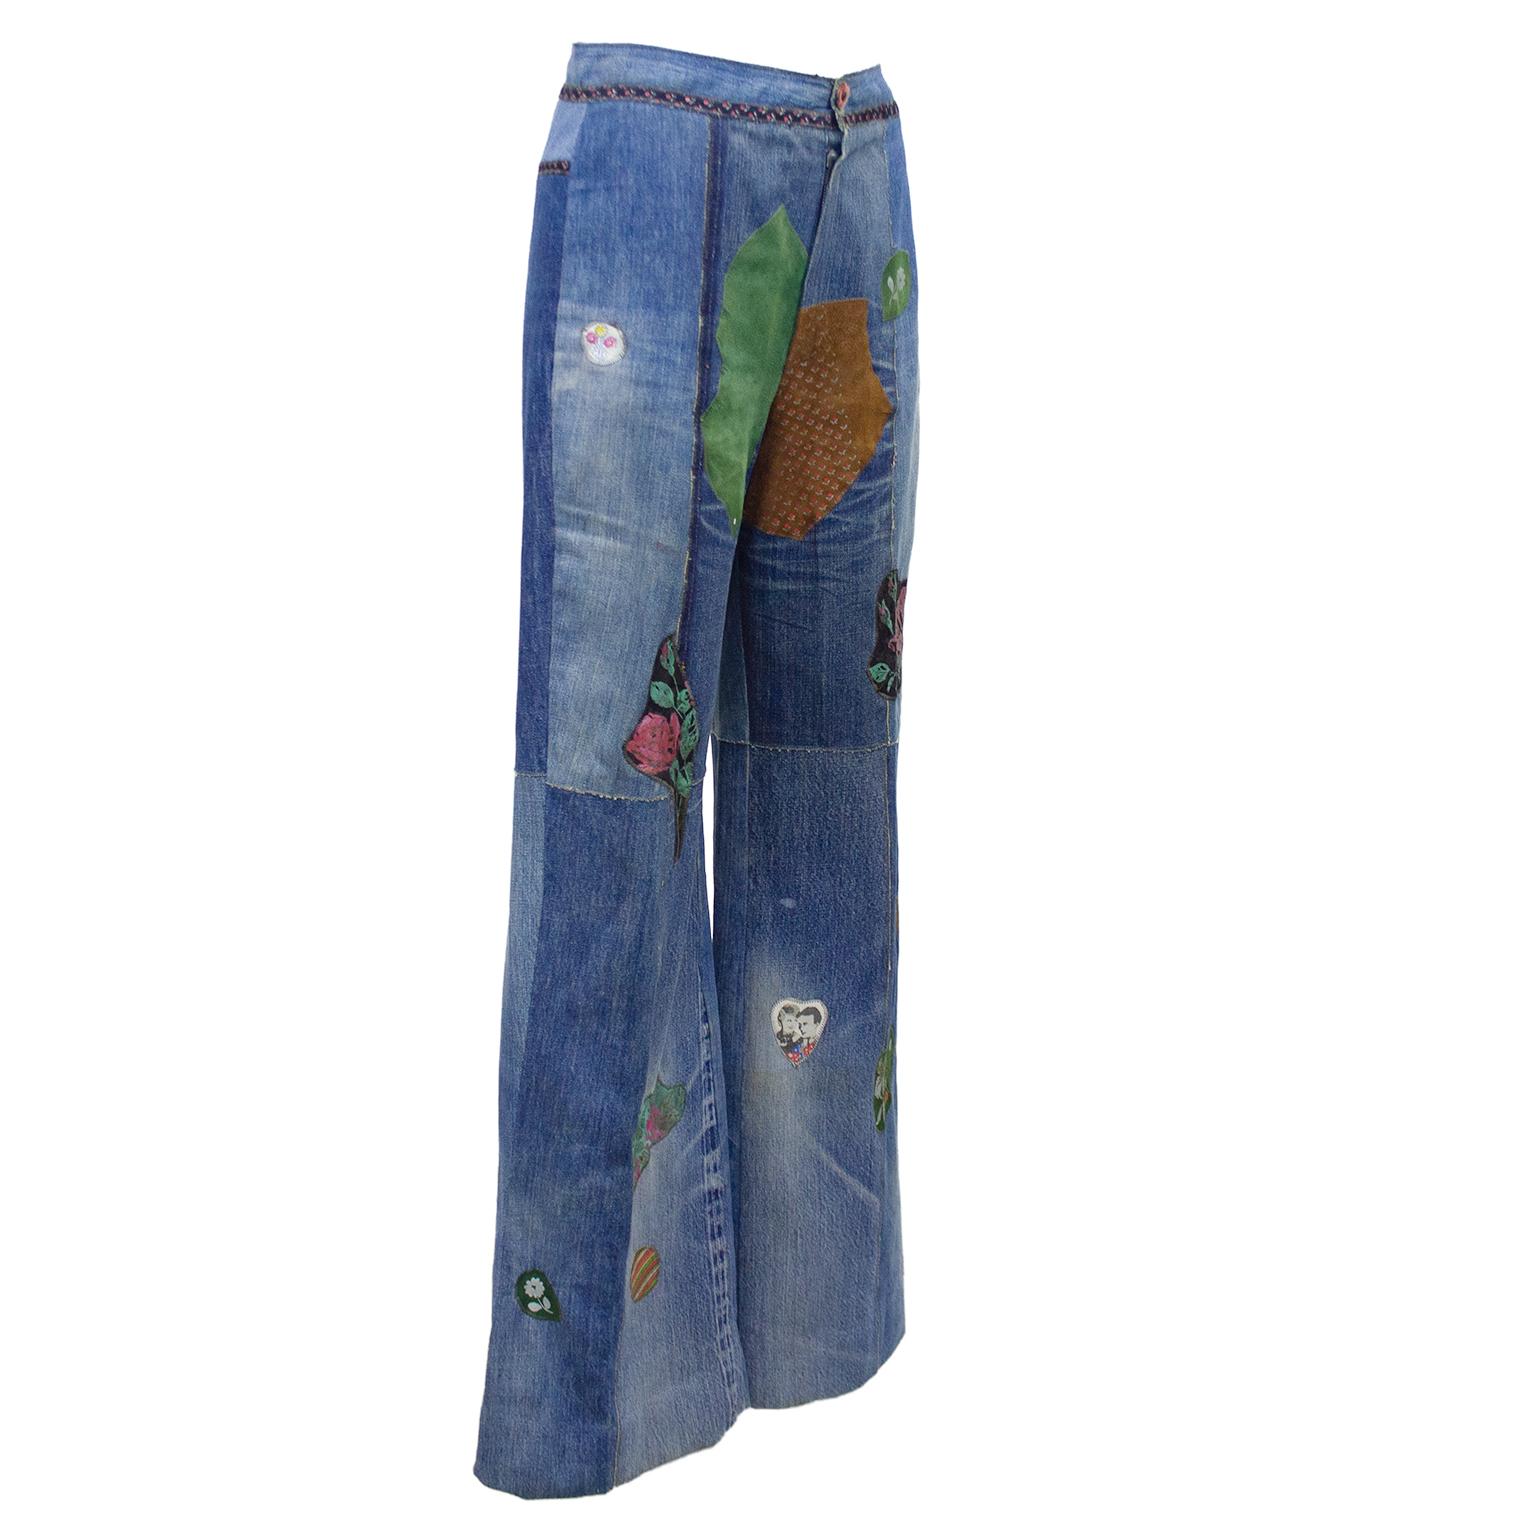 Fun 1990s Roberto Cavalli jeans. Mixed media all over patchwork. Flared shape and patchwork give the jeans a very 70's hippy vibe. Covered button fly with a red flower shaped top button. Fit like a US size 4. Excellent vintage condition. Made in